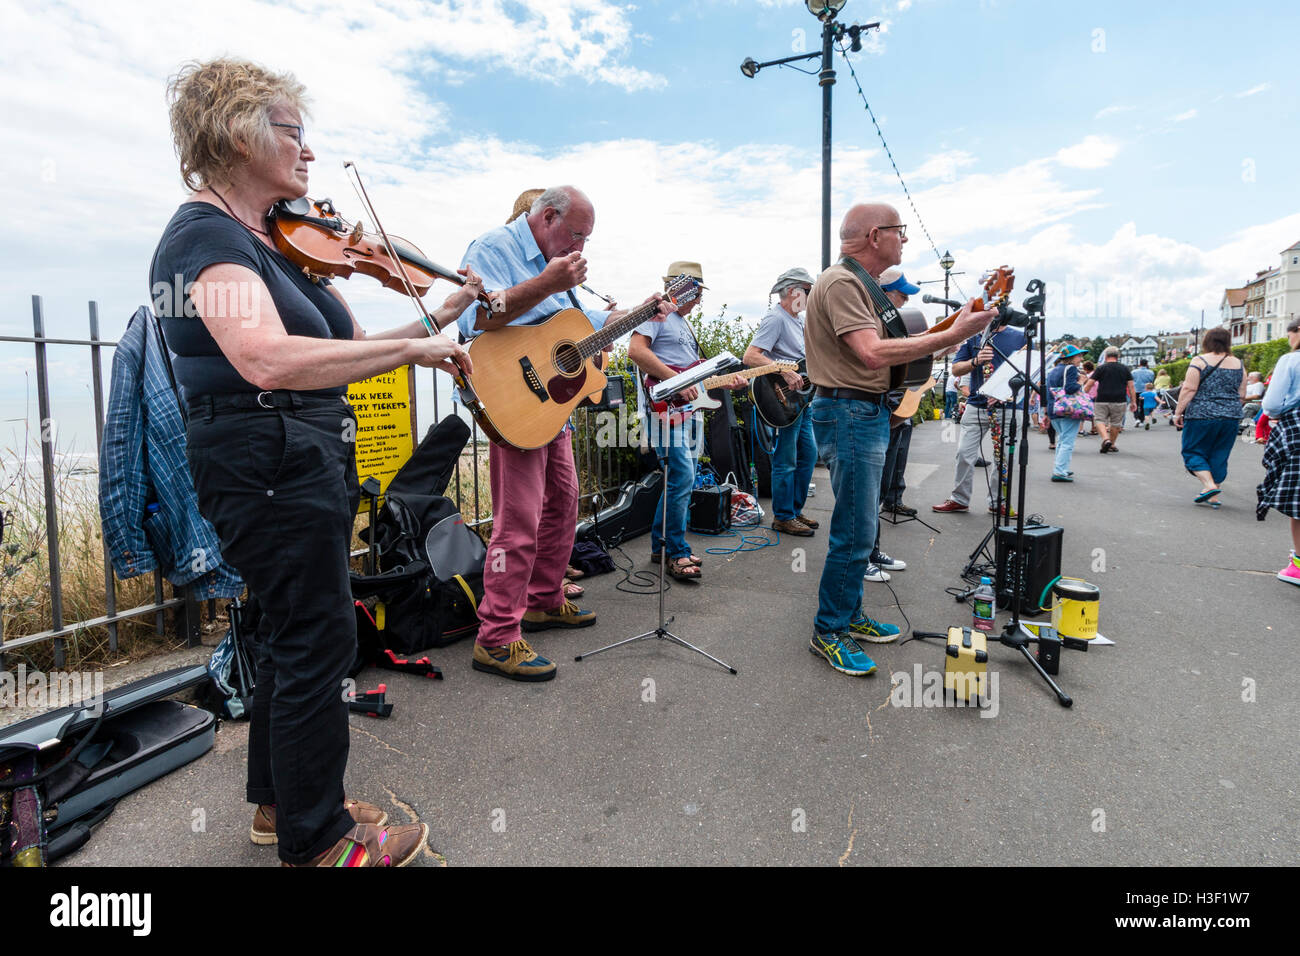 The Bay Boys, musical folk group of senior men playing guitars in the sunshine, together with a woman fiddle player, perform a concert on the seafront. Stock Photo